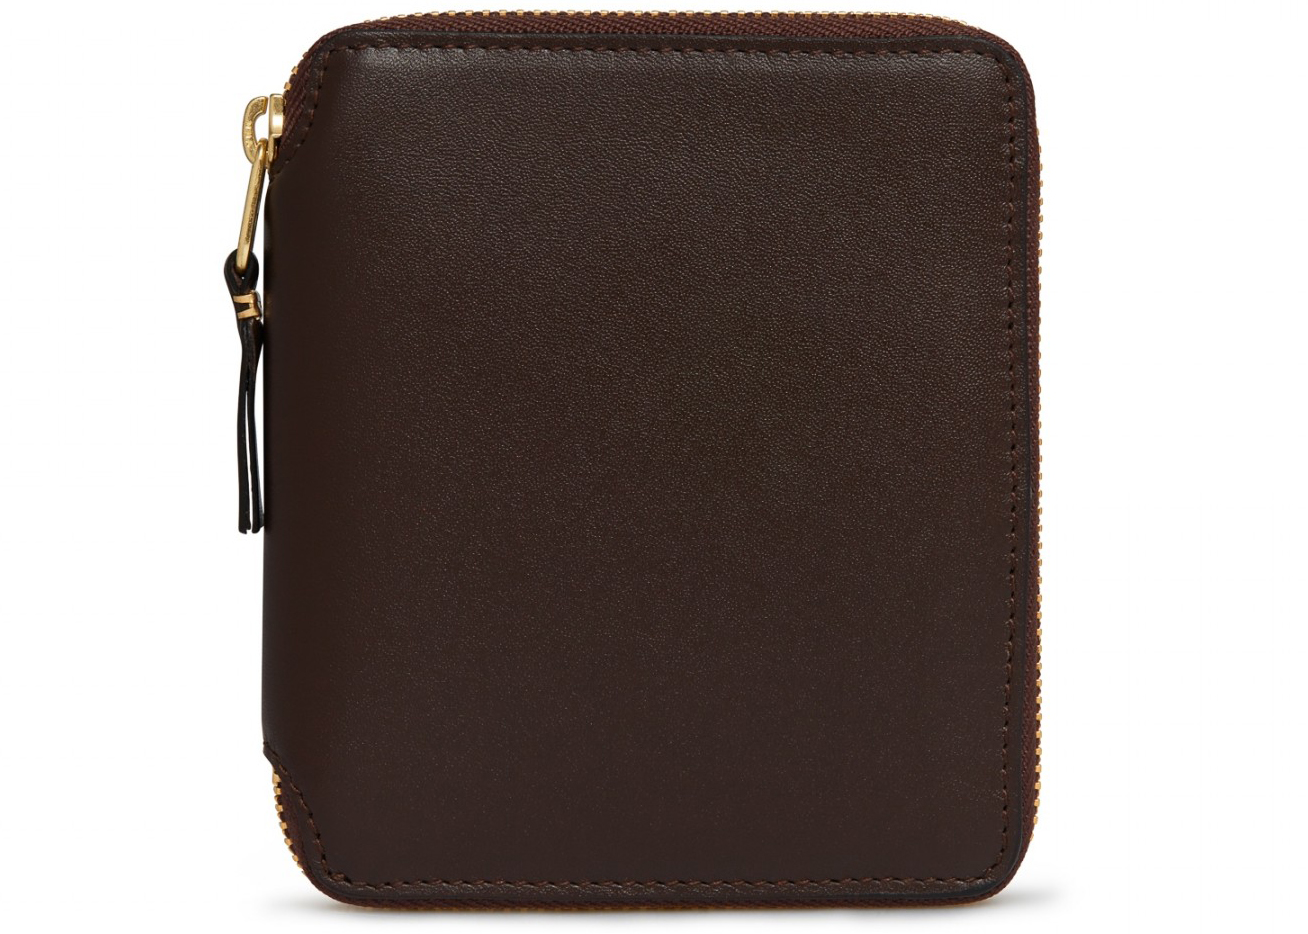 Comme des Garcons SA2100 Classic Plain Wallet Brown in Leather